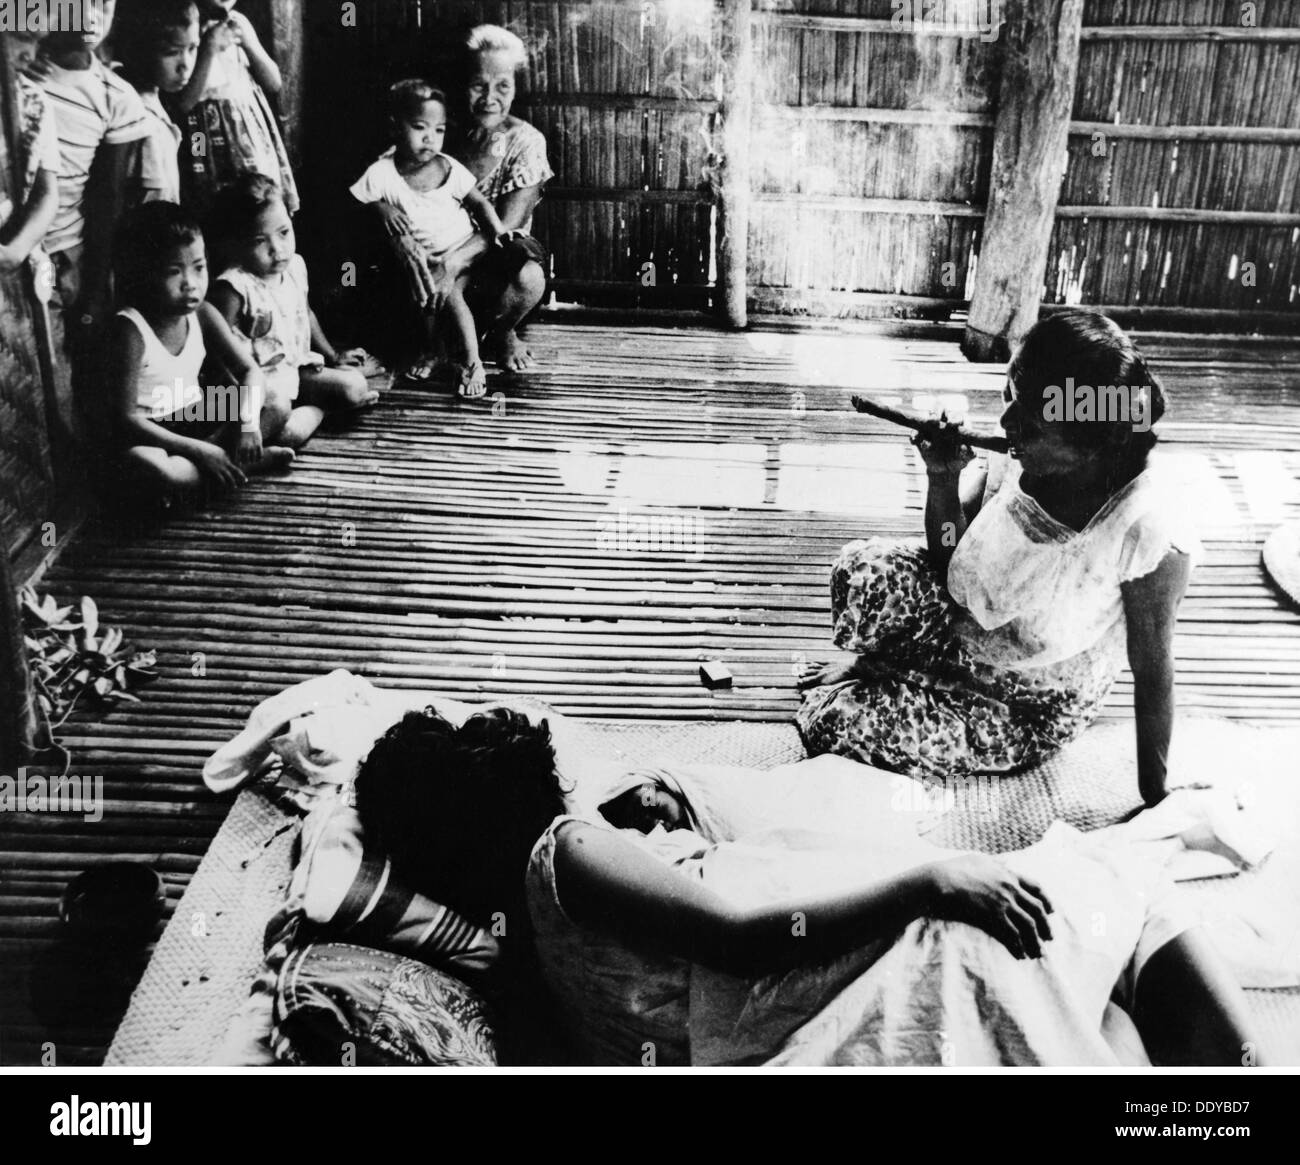 medicine, birth / gynecology, midwife smoking to repel evil spirits fom the hut of a pregnant woman, Escolastica, 1960s, Additional-Rights-Clearences-Not Available Stock Photo